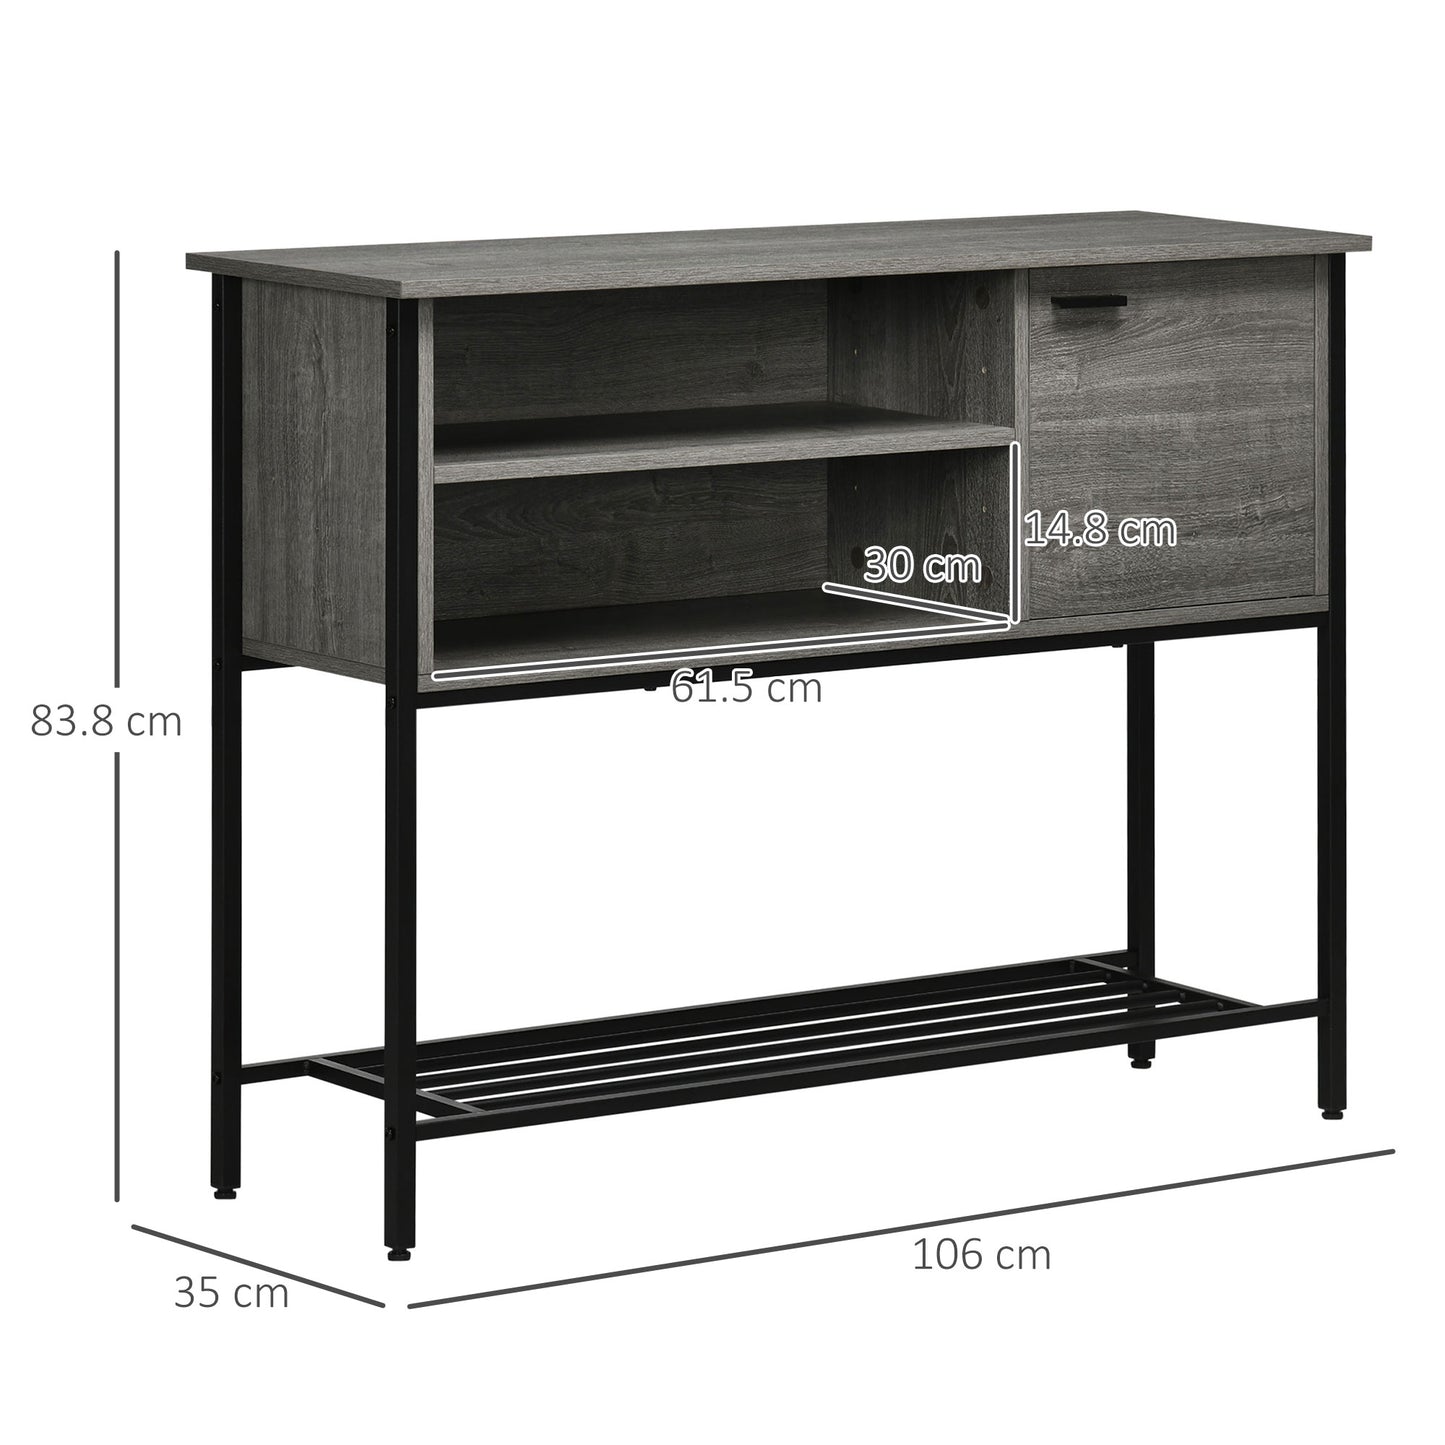 HOMCOM Industrial Console Table, Narrow Hallway Table with Cabinet, Grey